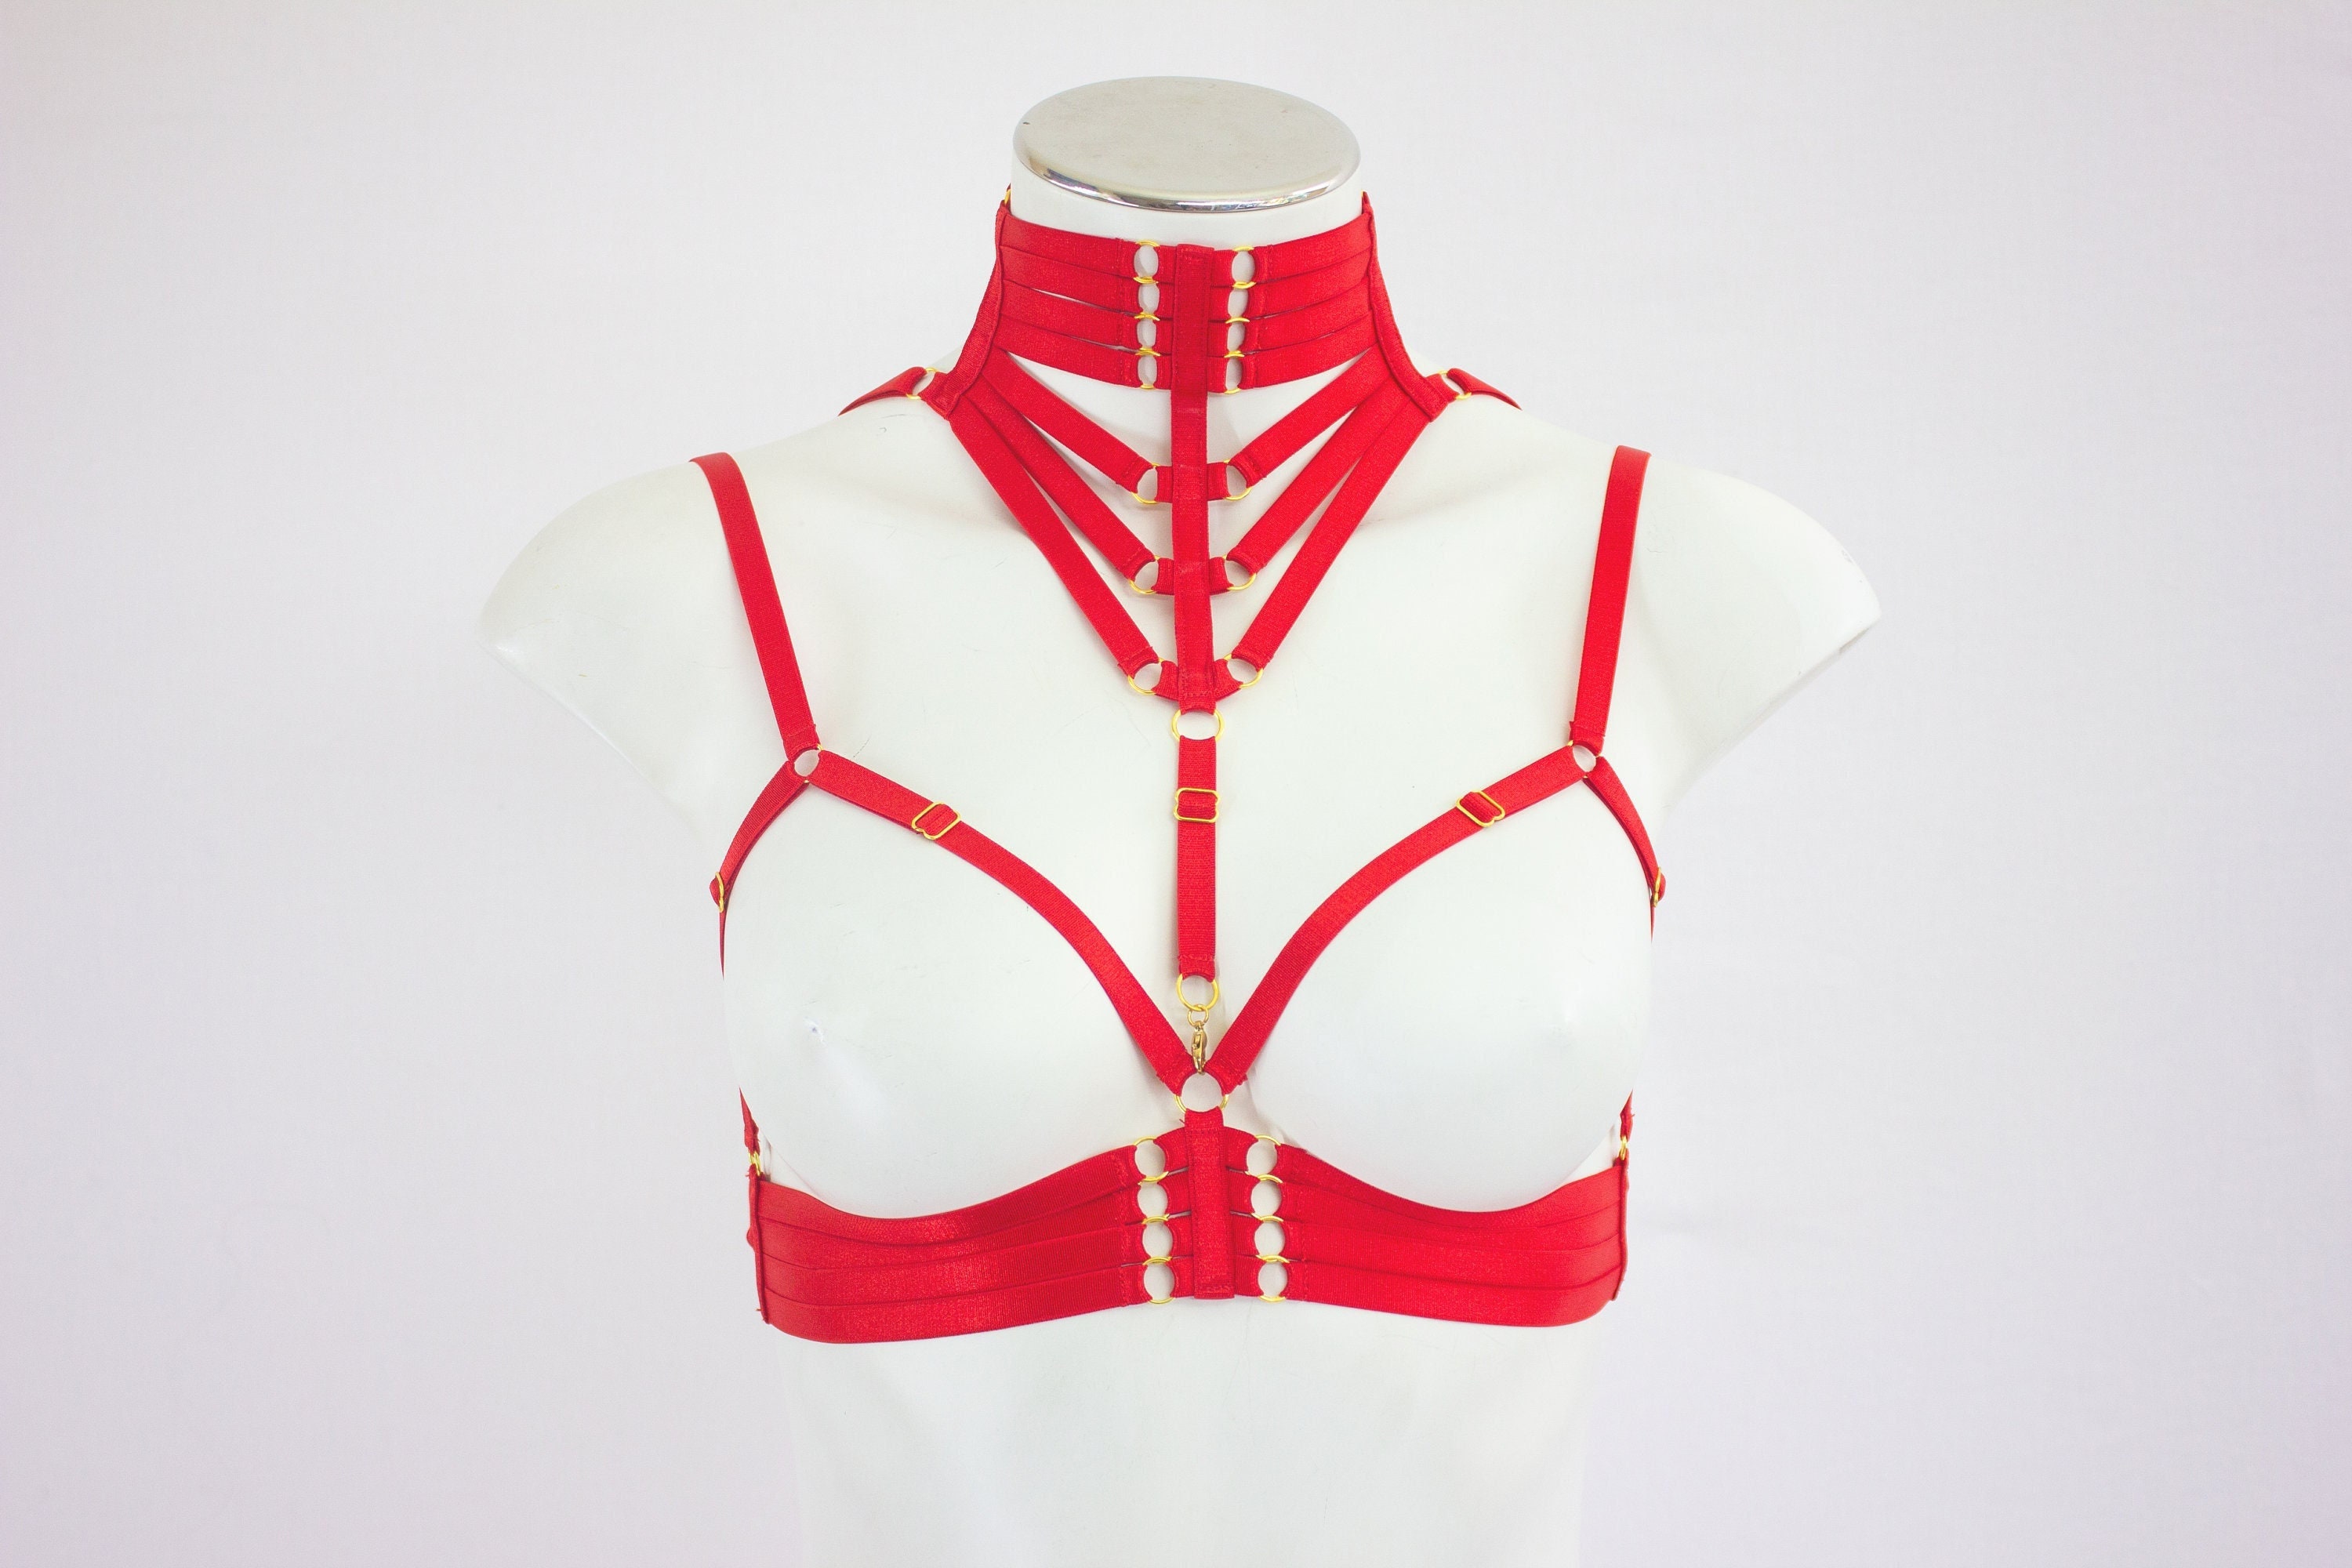 Red Body Harness Lingerie Bralette Triangle Cage Bra Harness Top Sexy Red Lingerie Boudoir 